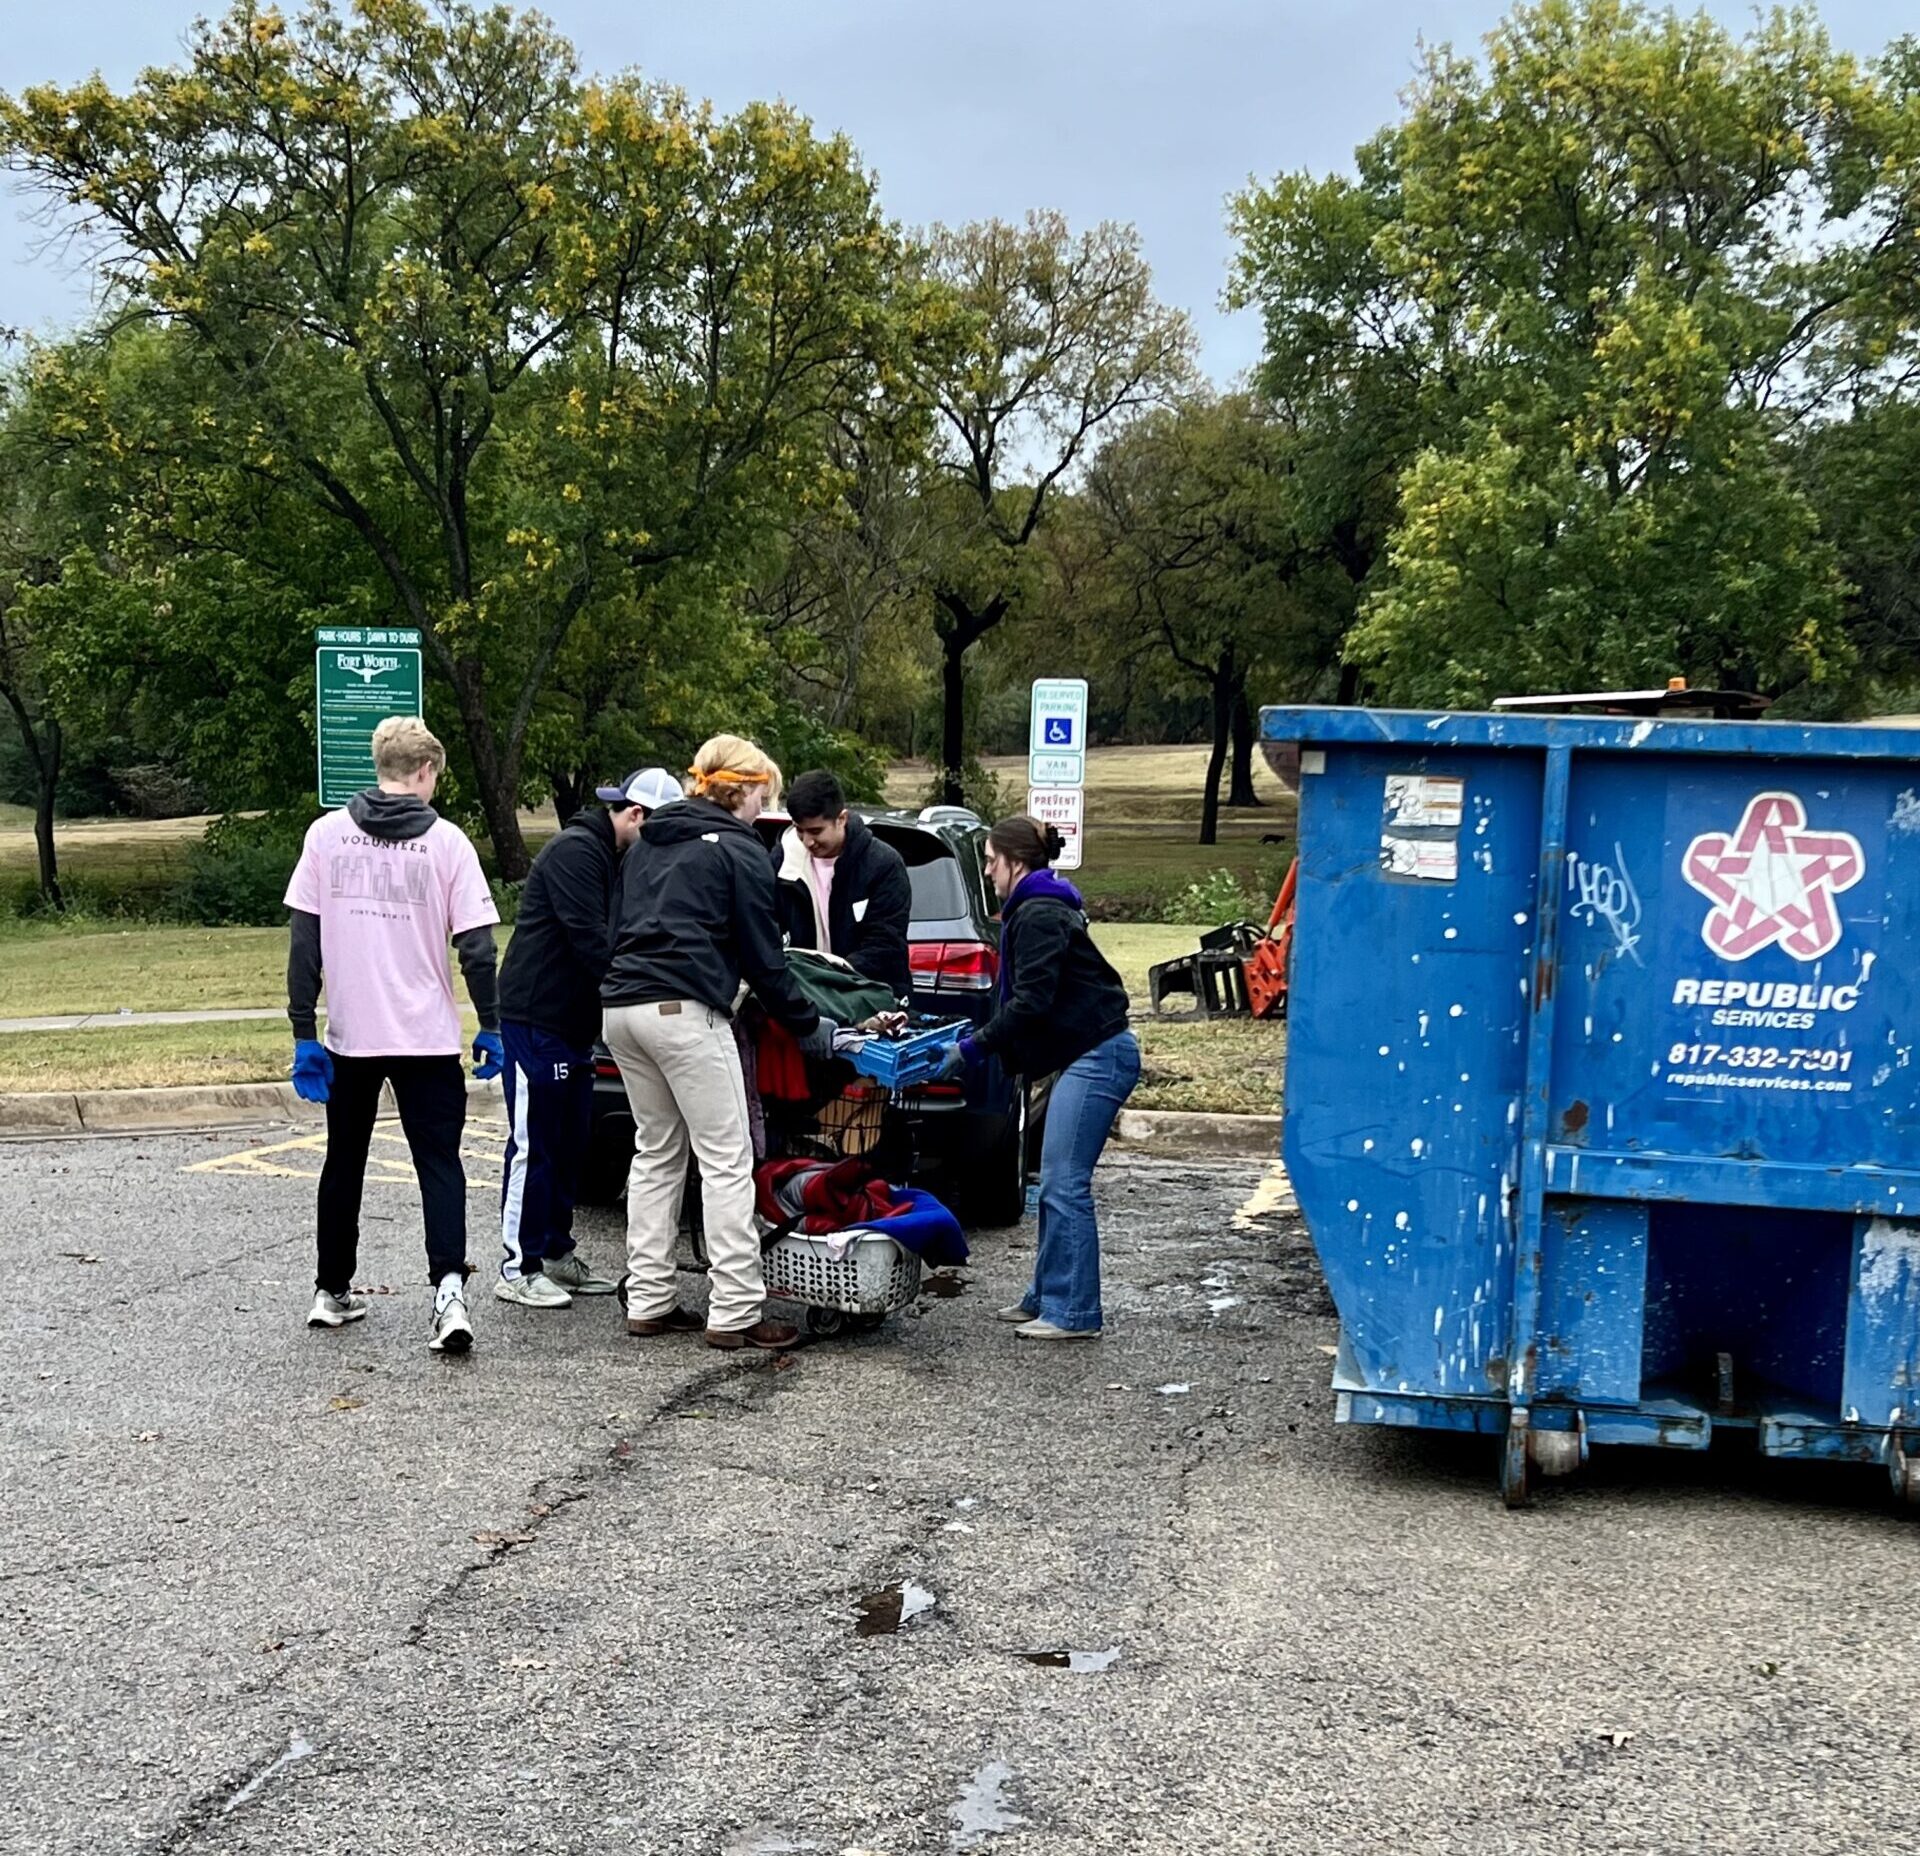 TCU students disposing of large trash items found in the park